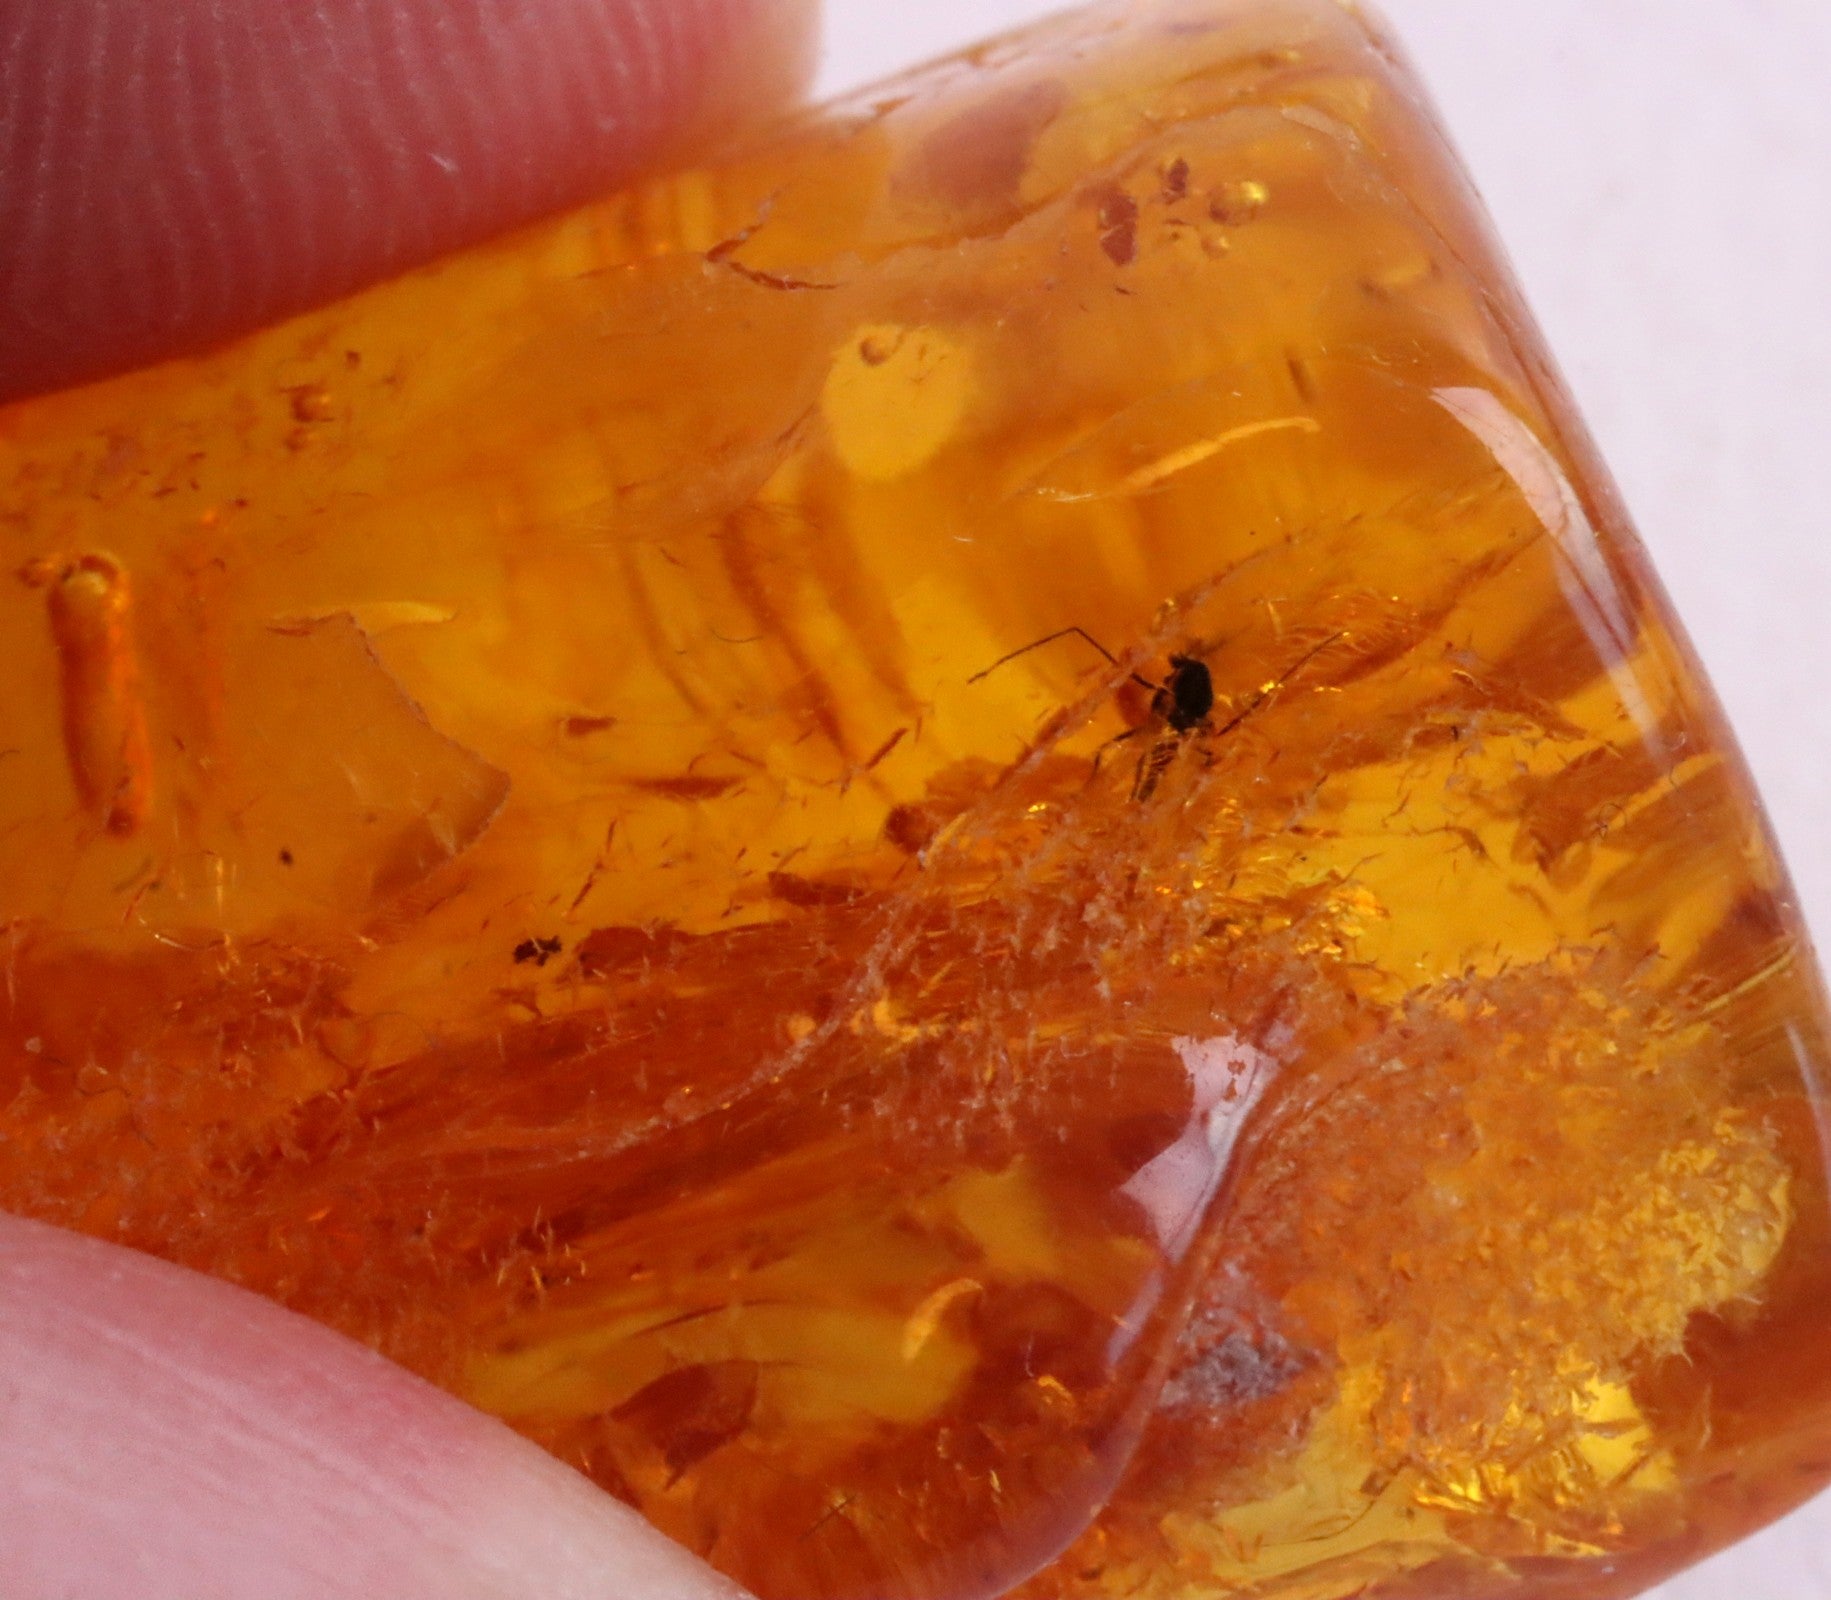 Baltic Amber Museum Collector's gem With Insects Inclusion